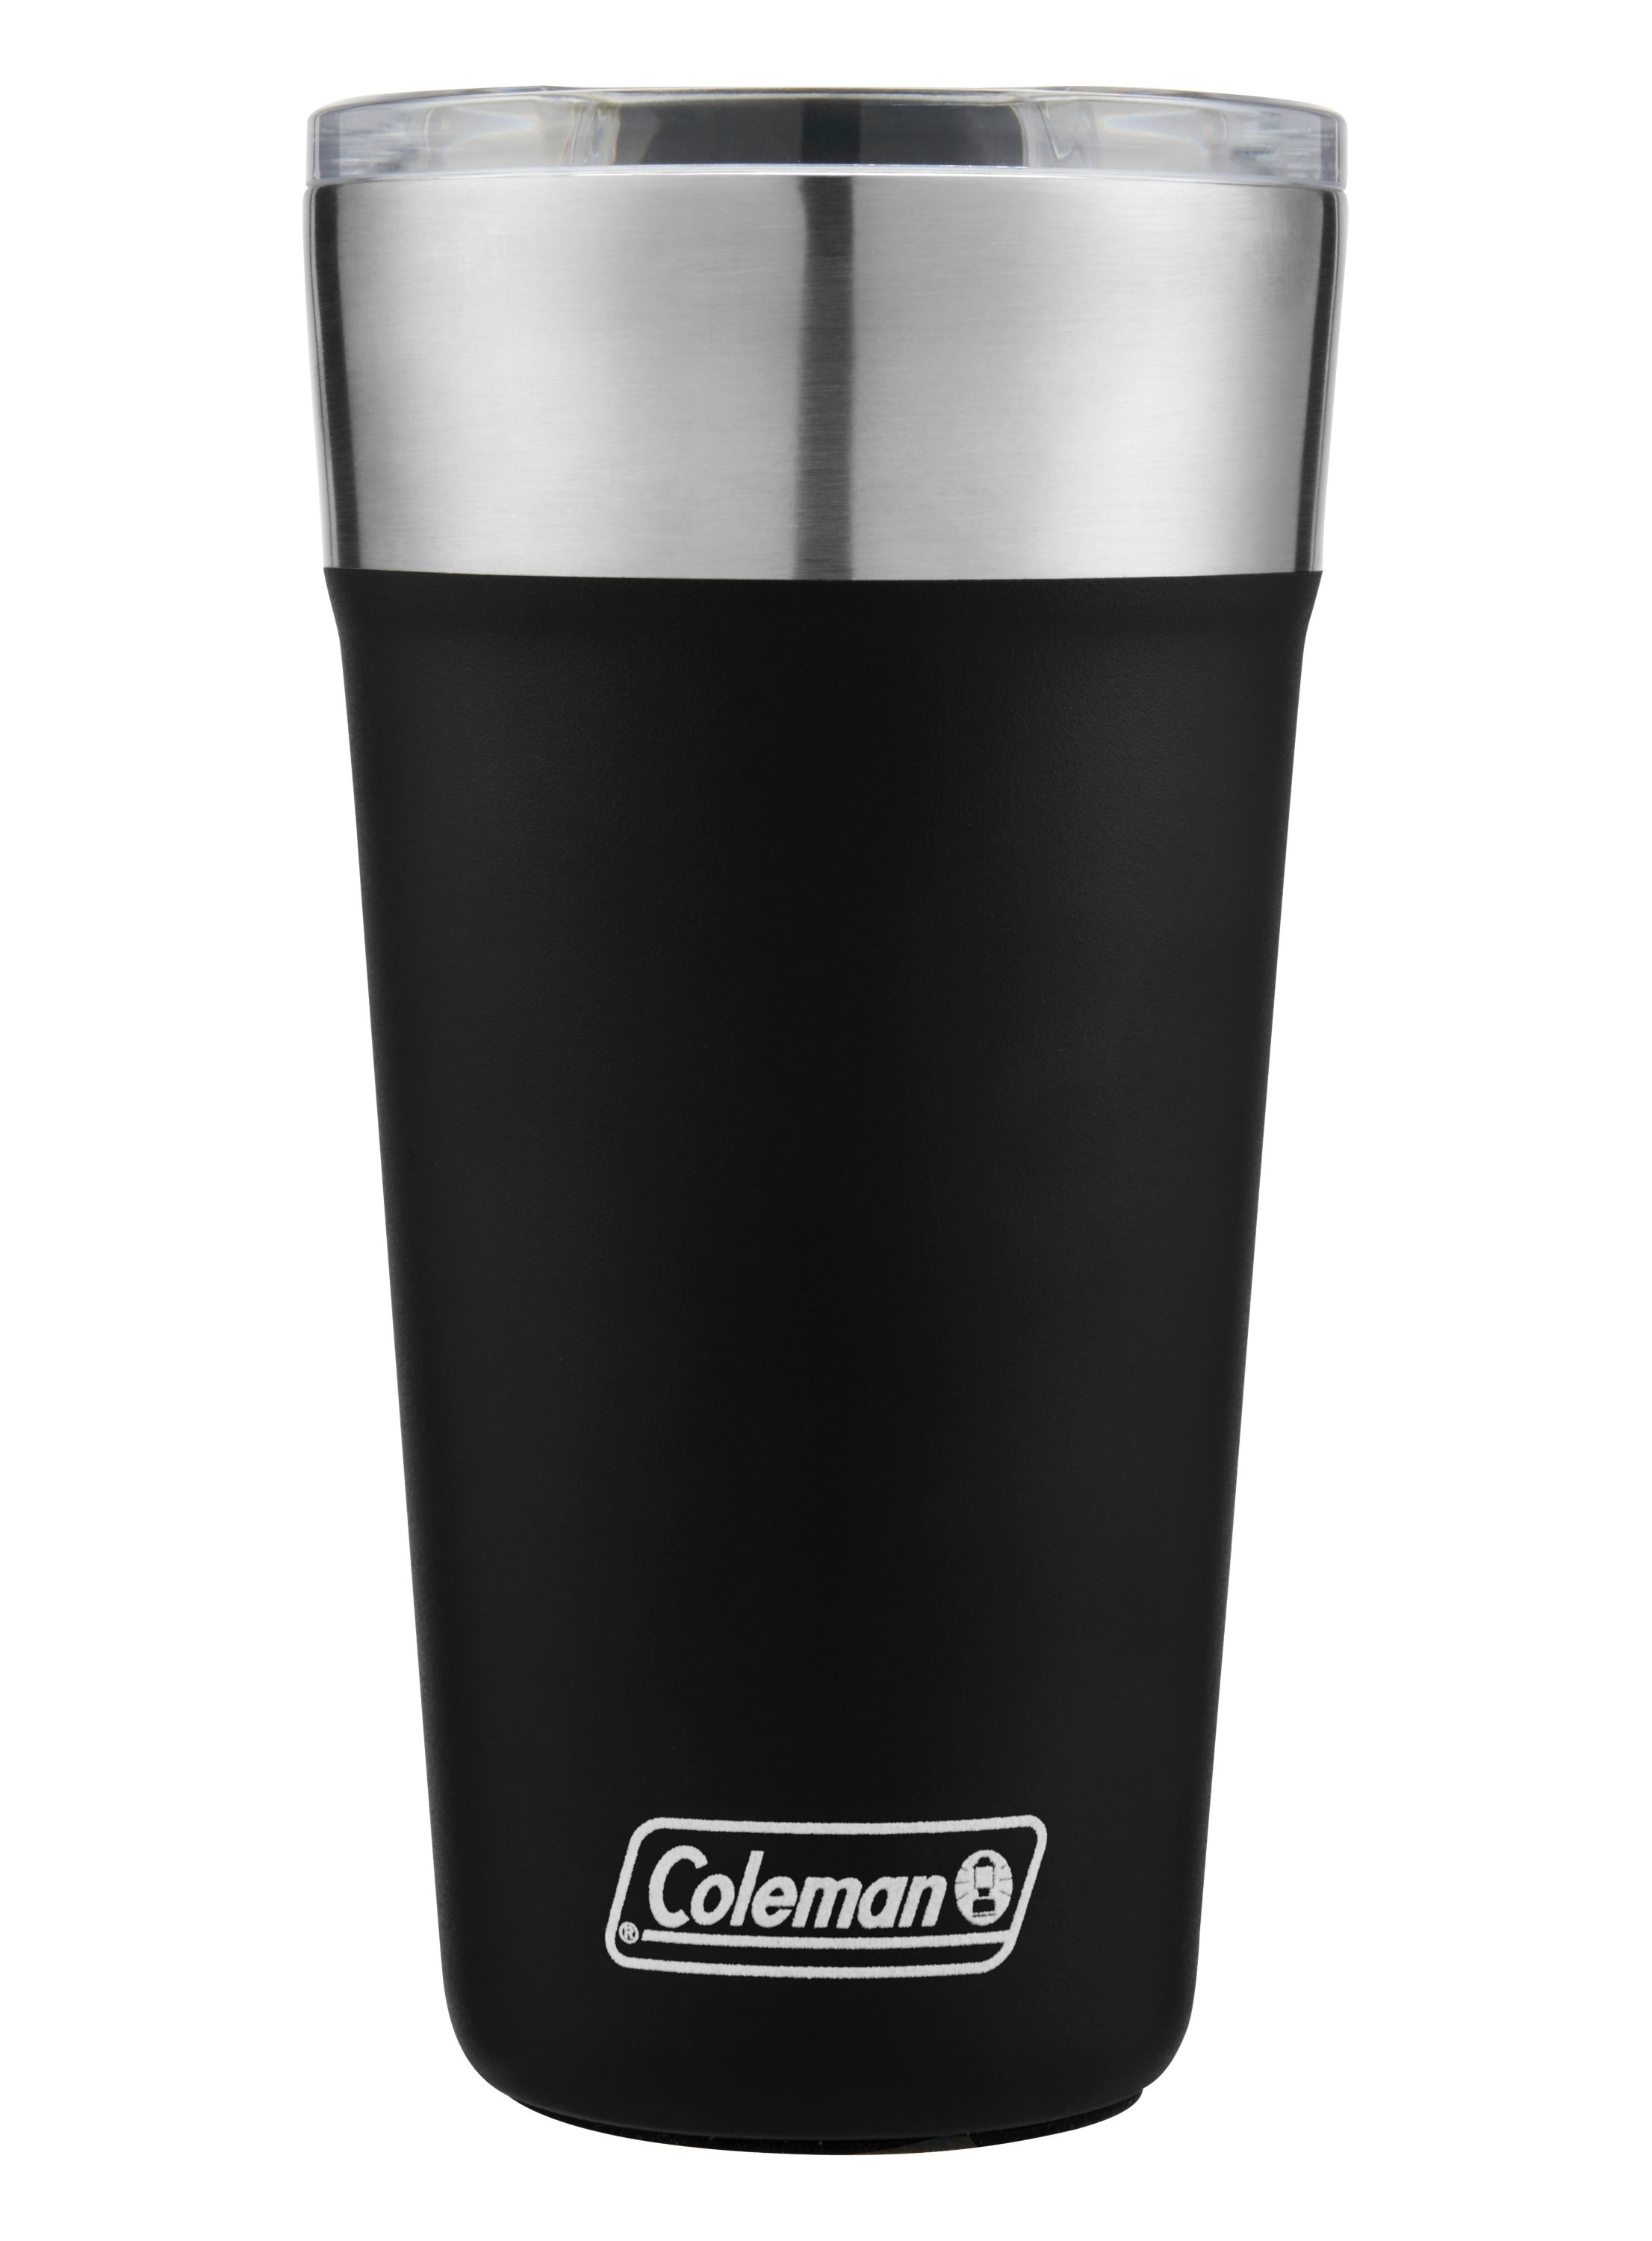 Coleman Cloud Stainless Steel Insulated Tumbler, 20 Oz.